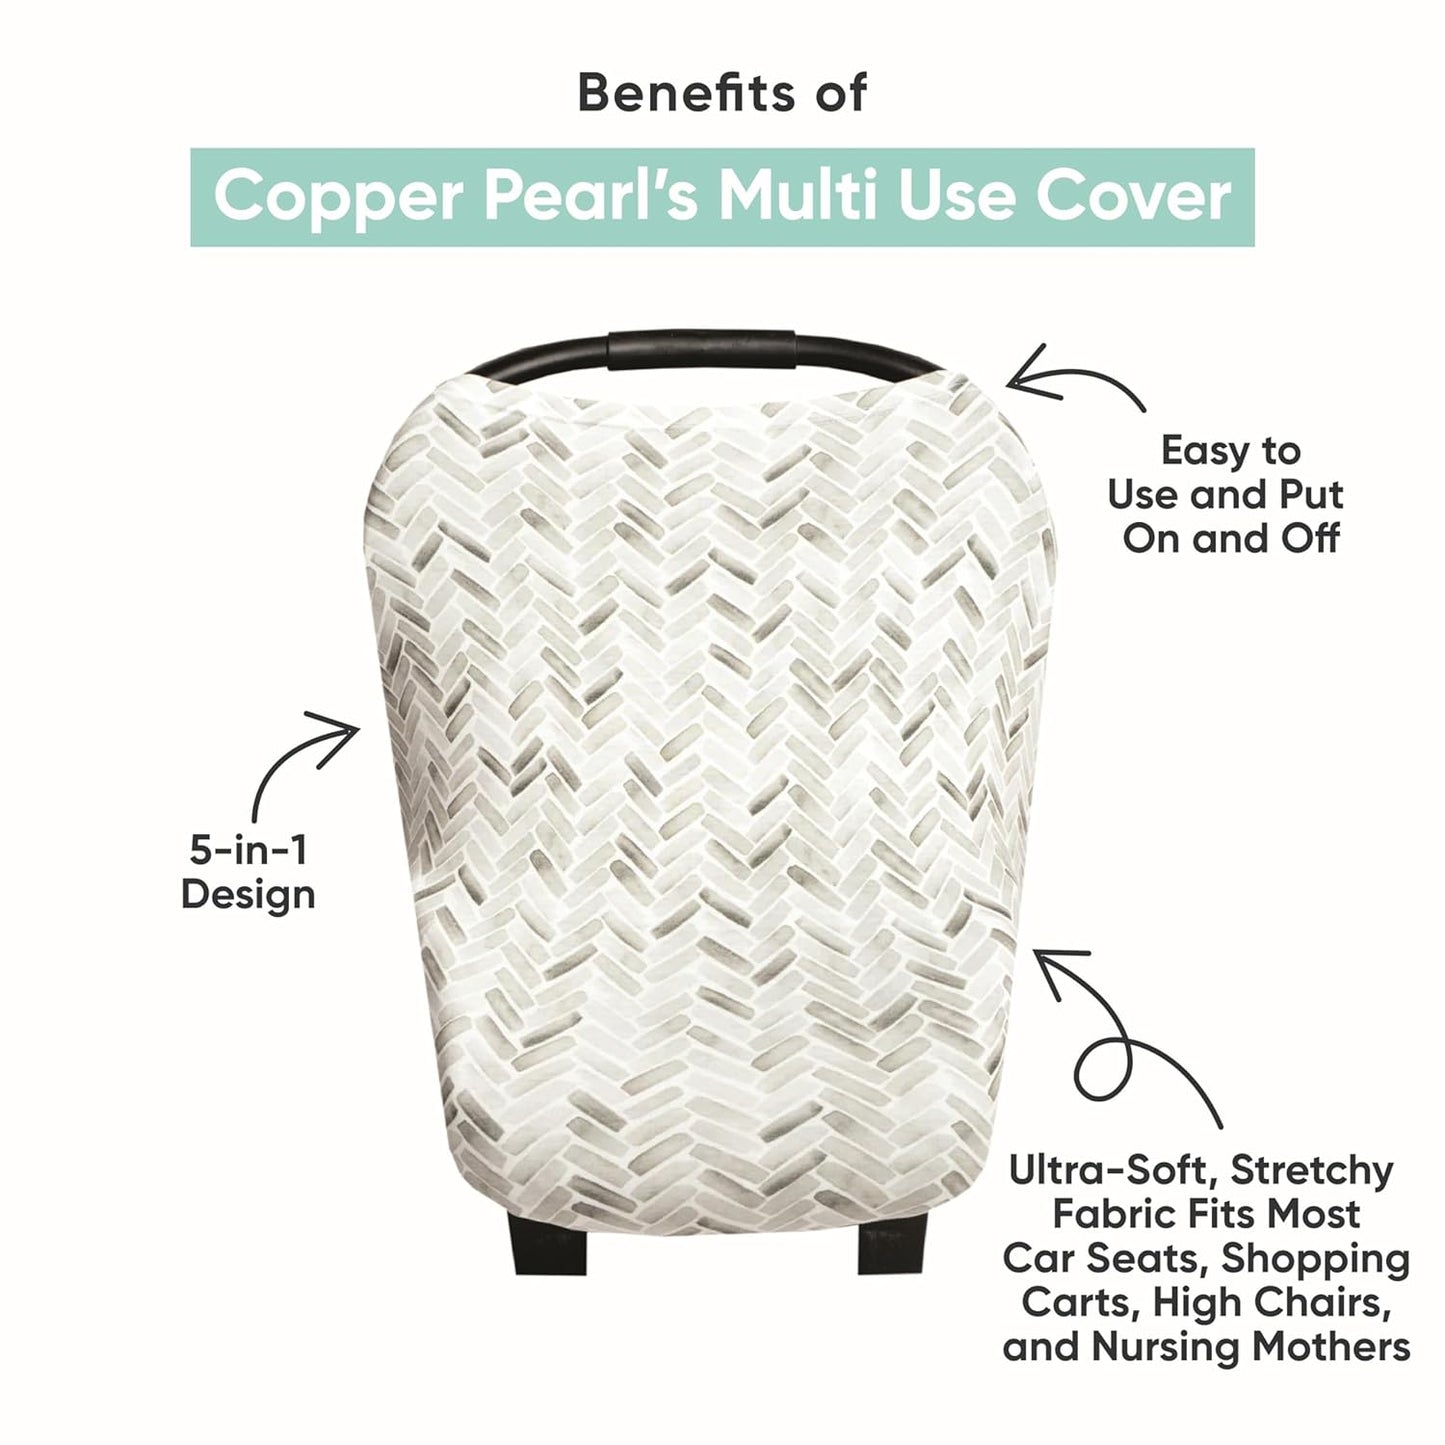 Baby Car Seat Cover Canopy and Nursing Cover Multi-Use Stretchy 5 in 1 Gift "Asher" by Copper Pearl